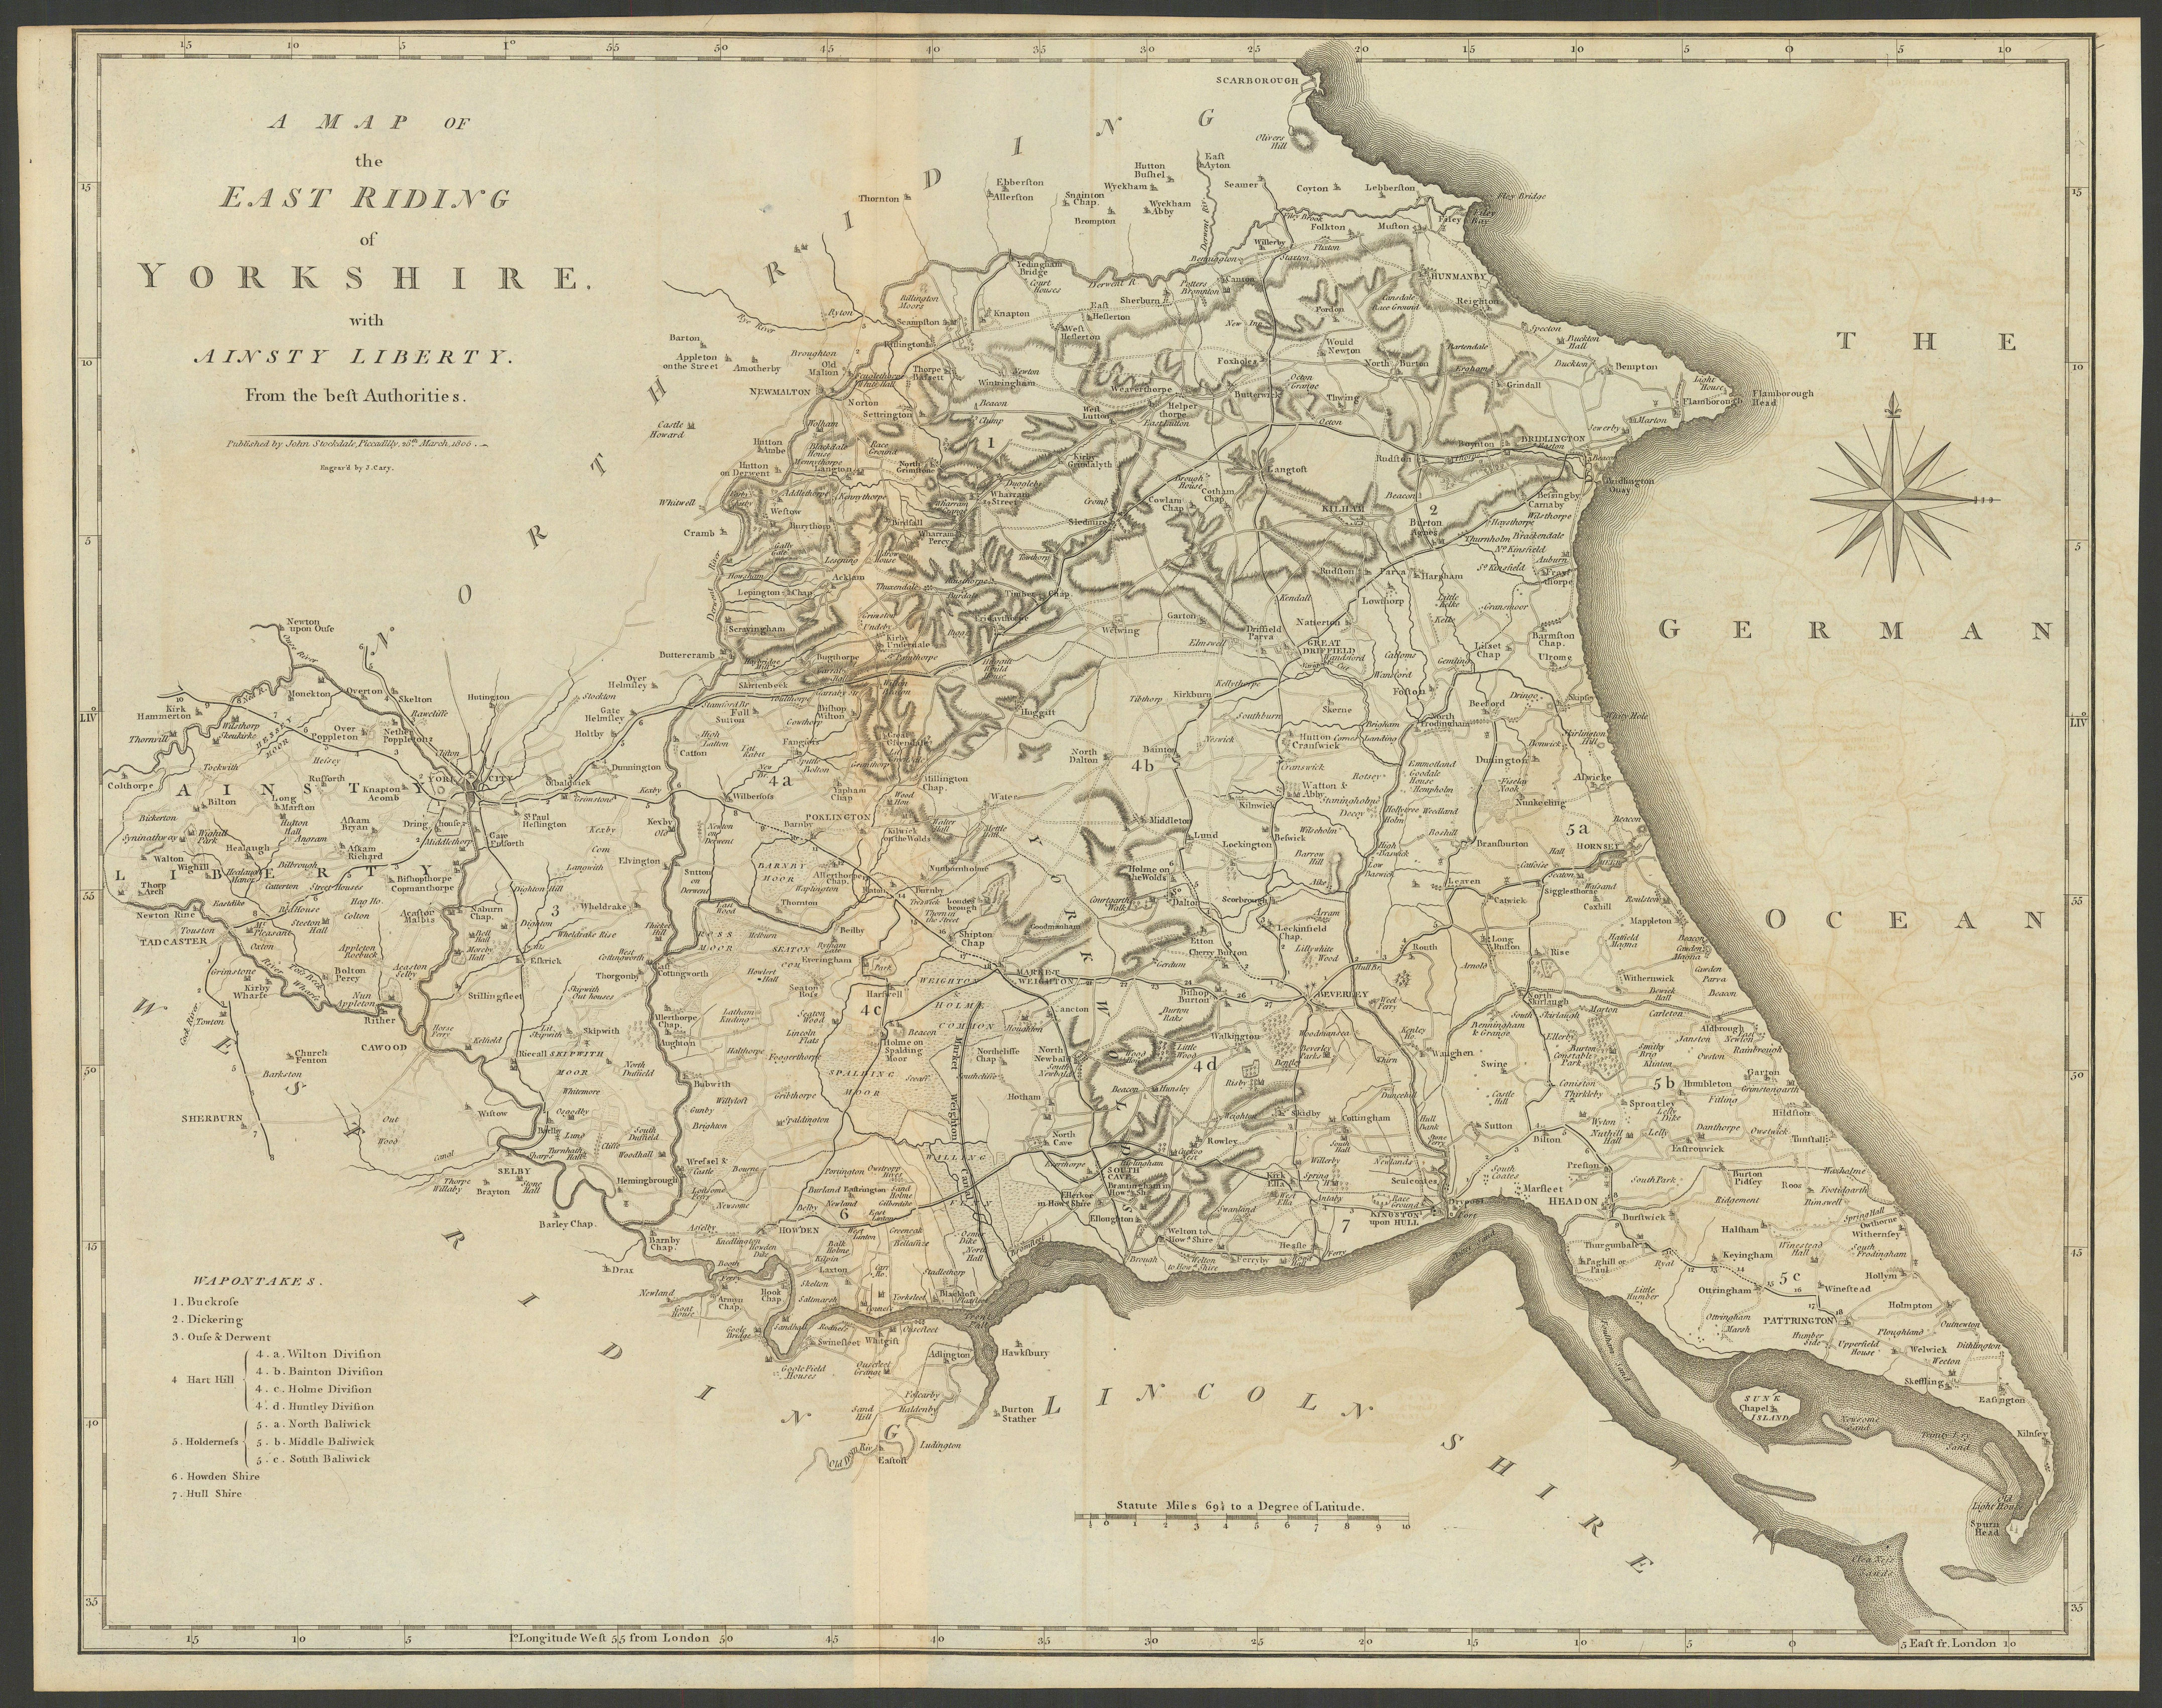 Associate Product A map of the East Riding of Yorkshire with Ainsty Liberty by John CARY 1806